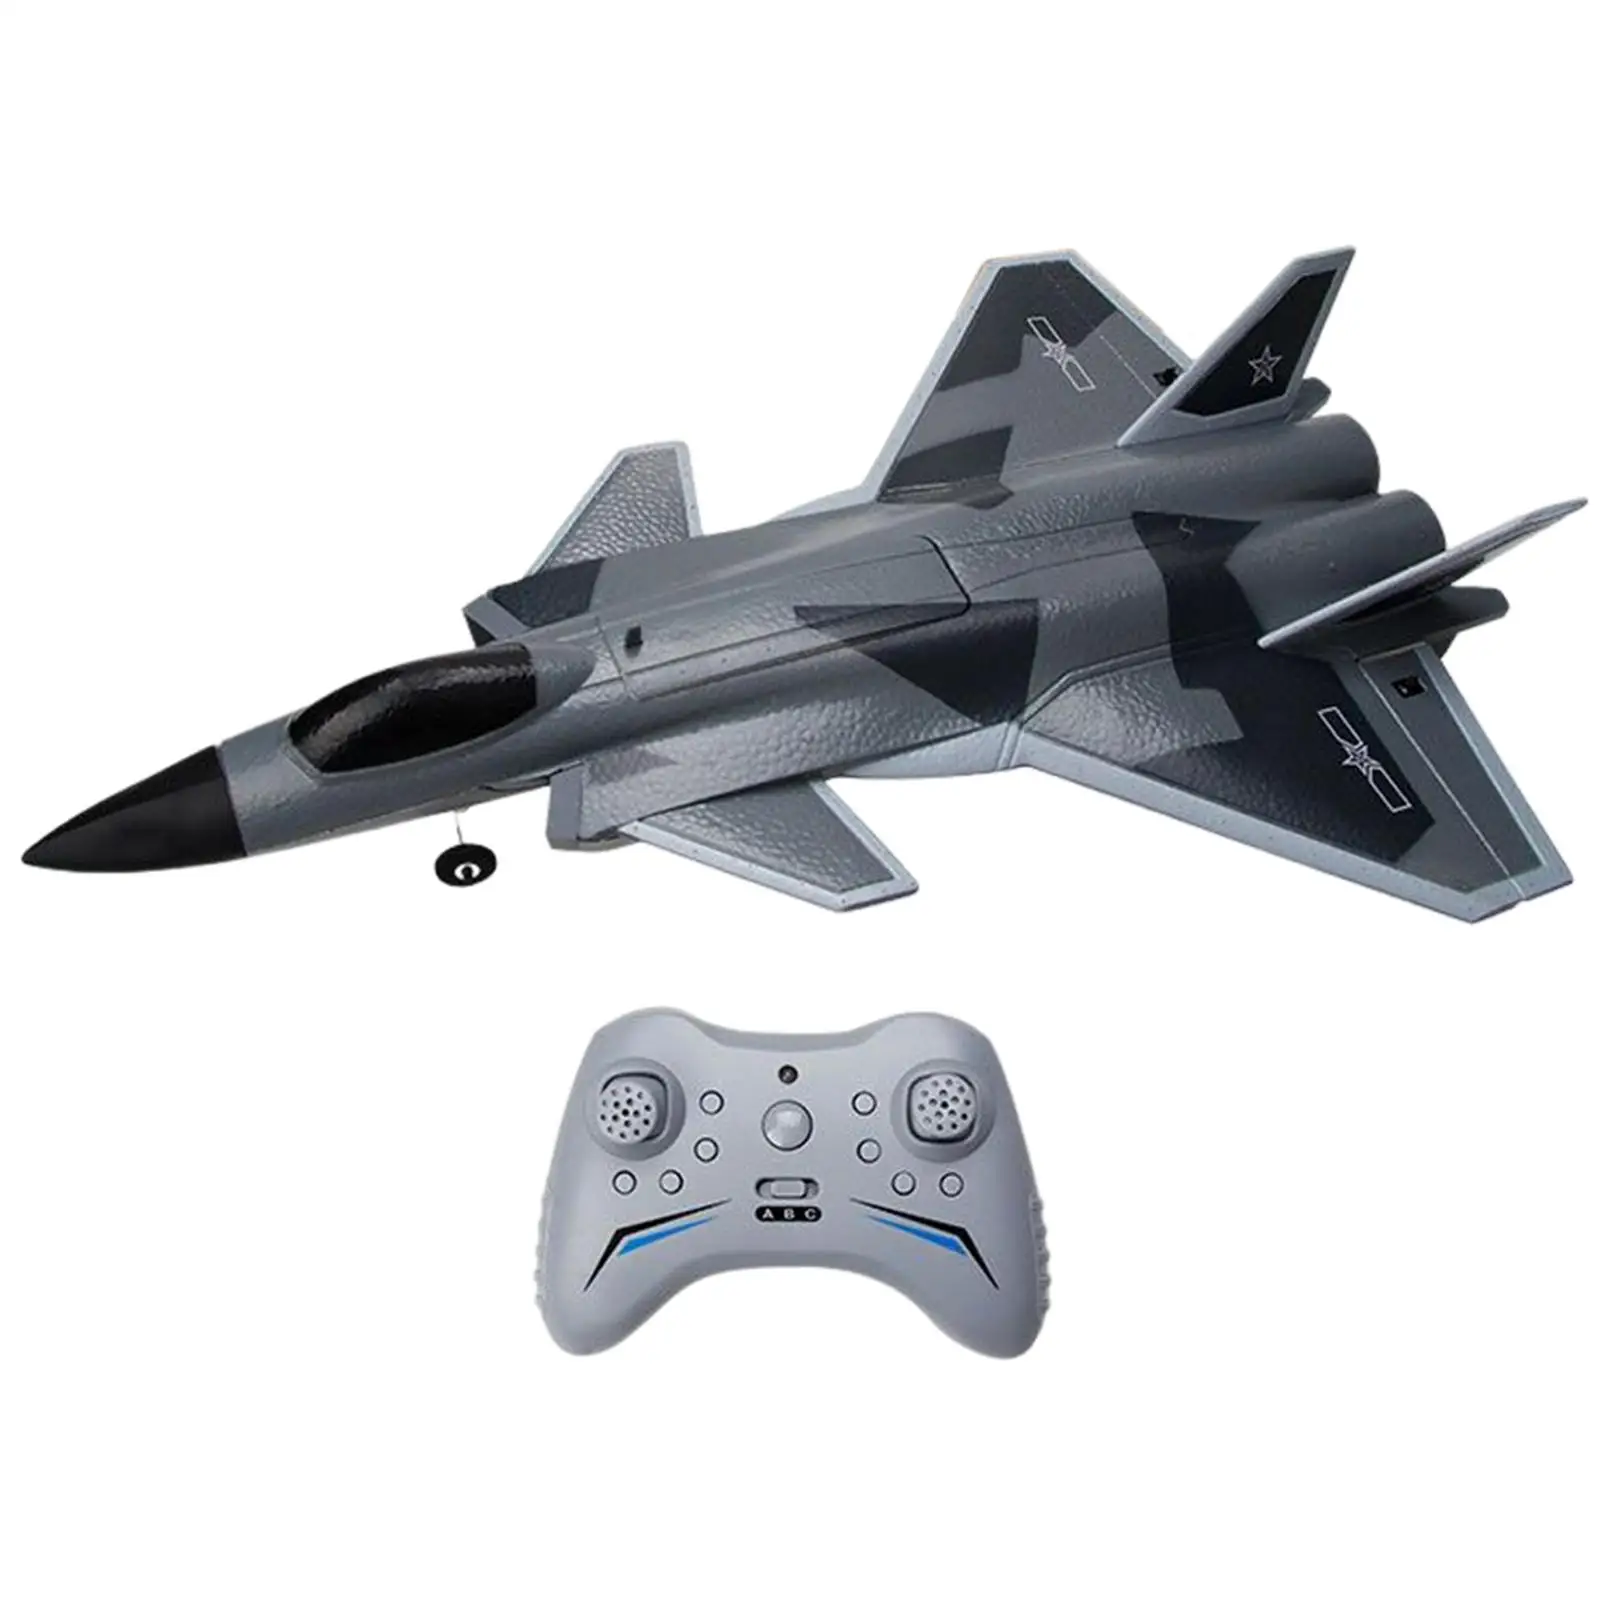 RC Fighter Remote Control Airplane 4 Channel Remote Controlled Aircraft Glider Outdoor Toys RC Plane for Boys Beginners